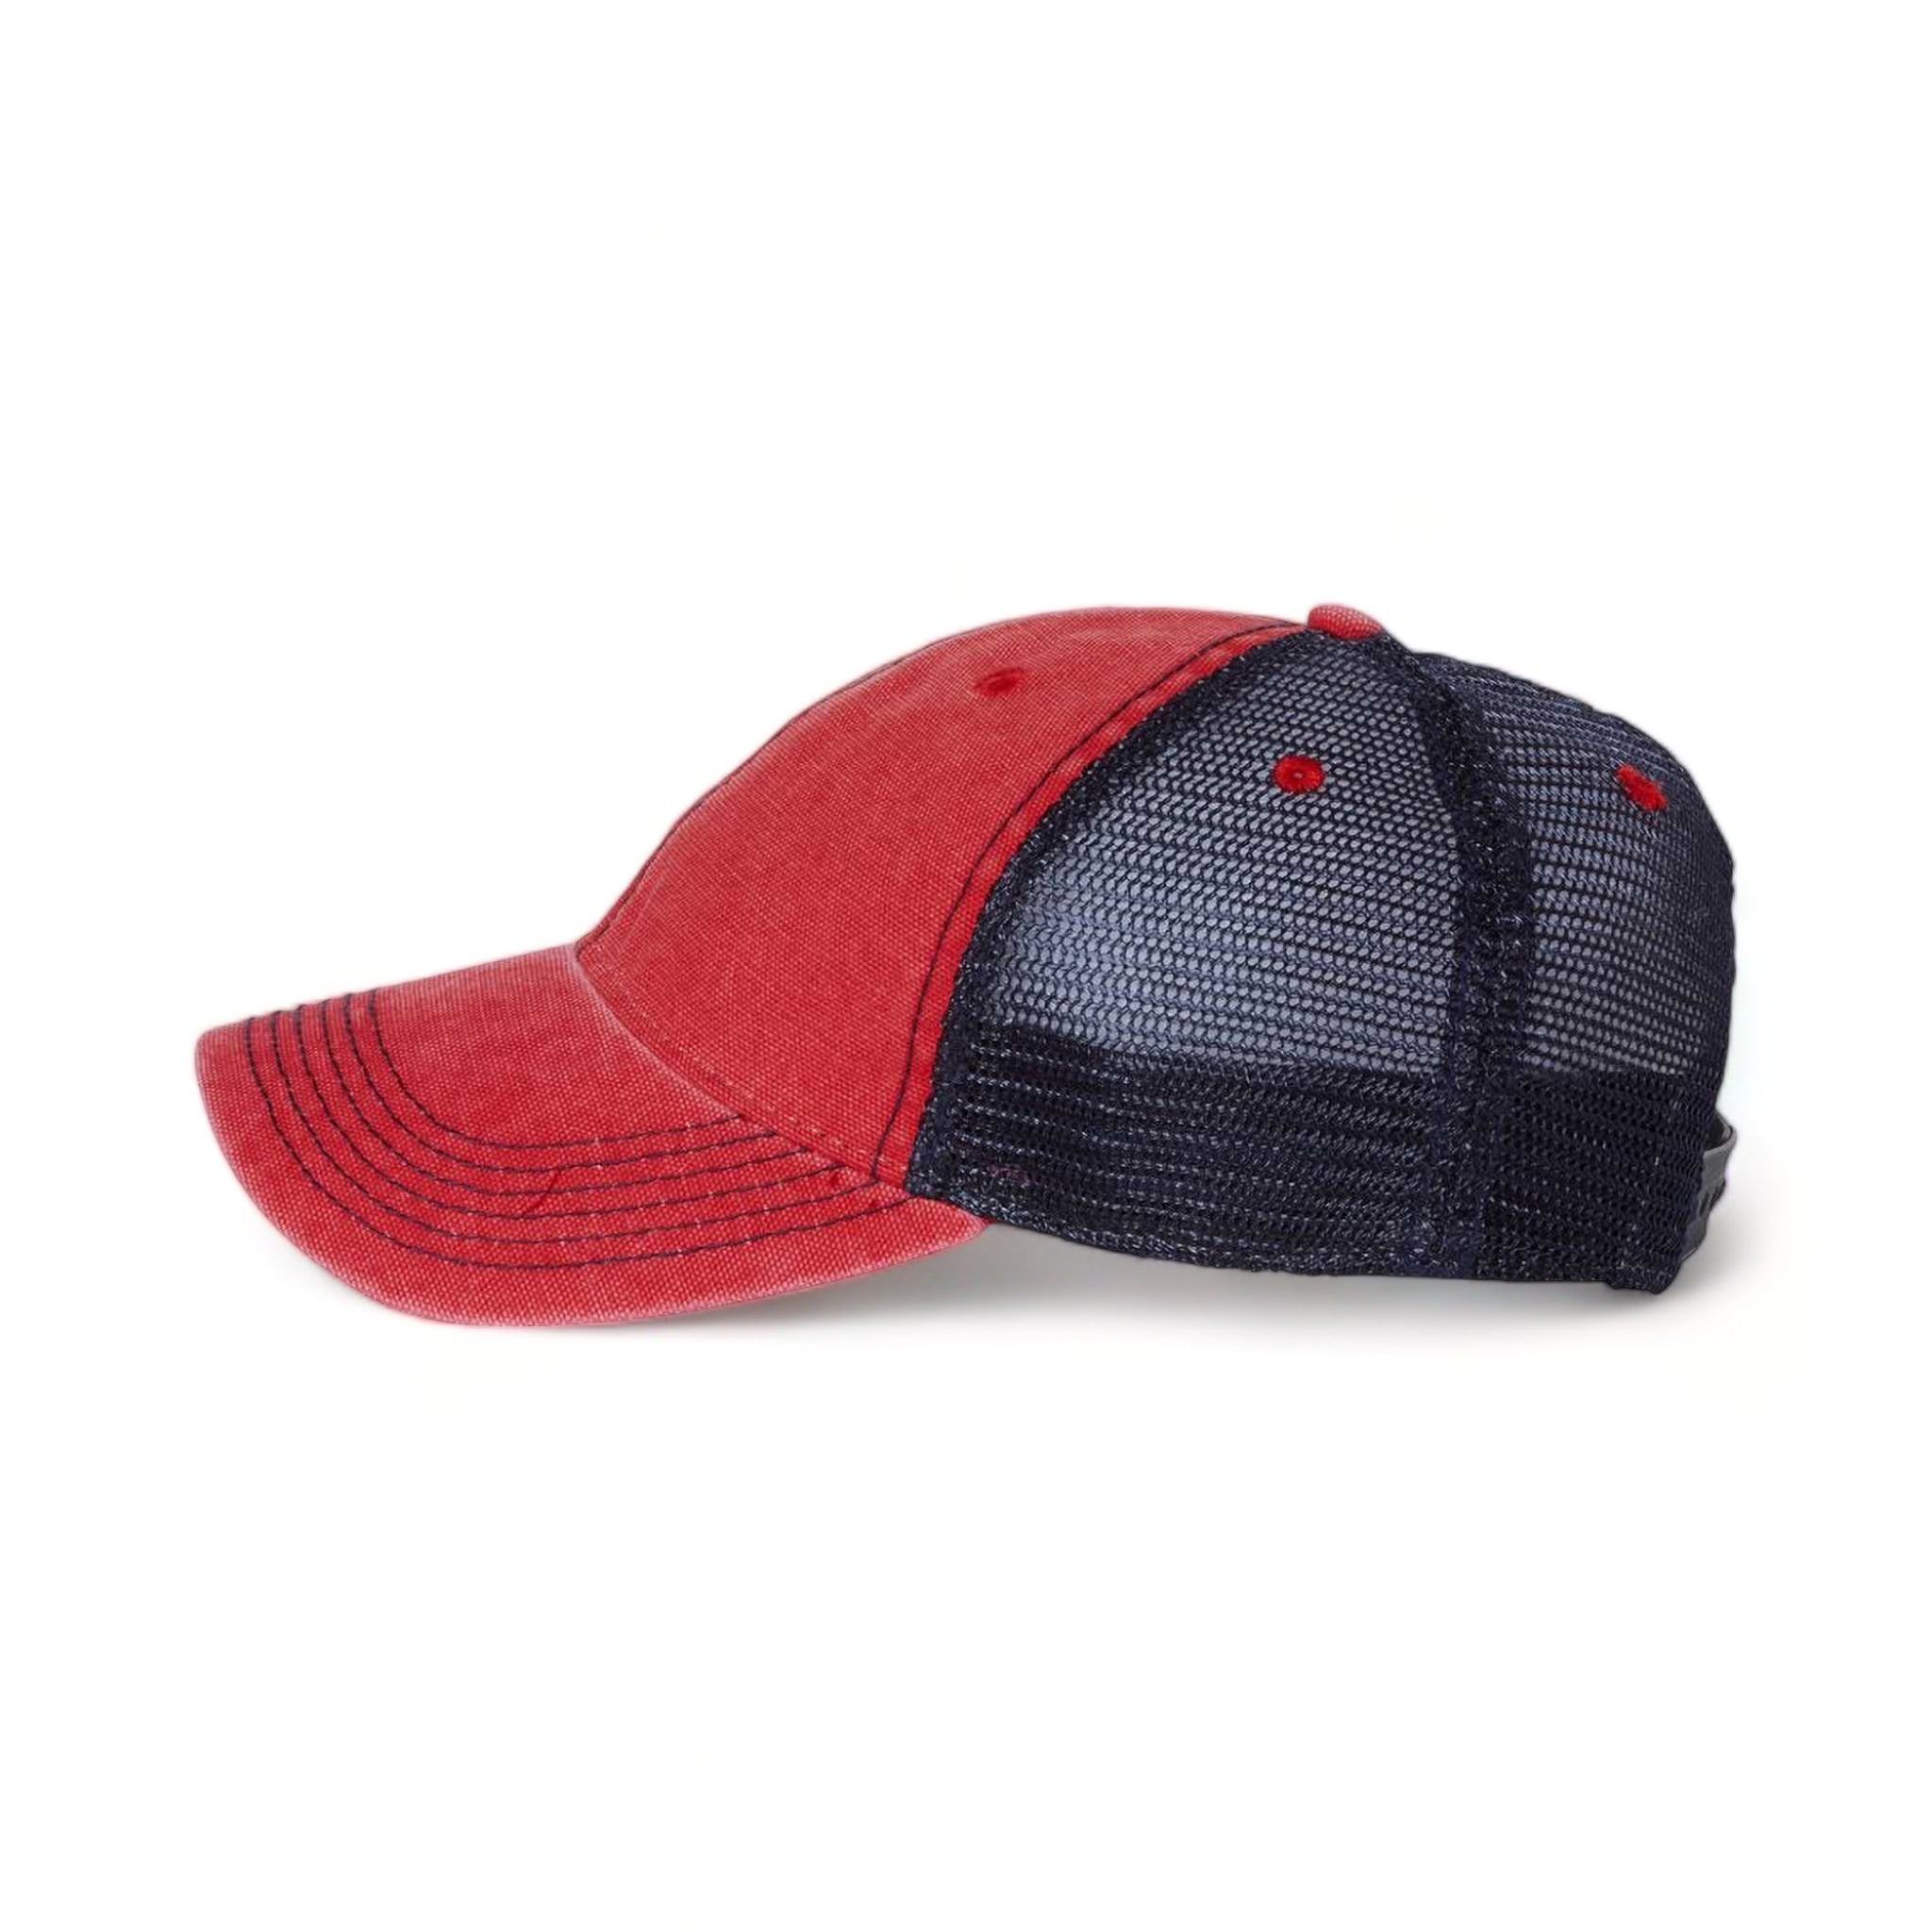 Side view of LEGACY DTA custom hat in scarlet red and navy